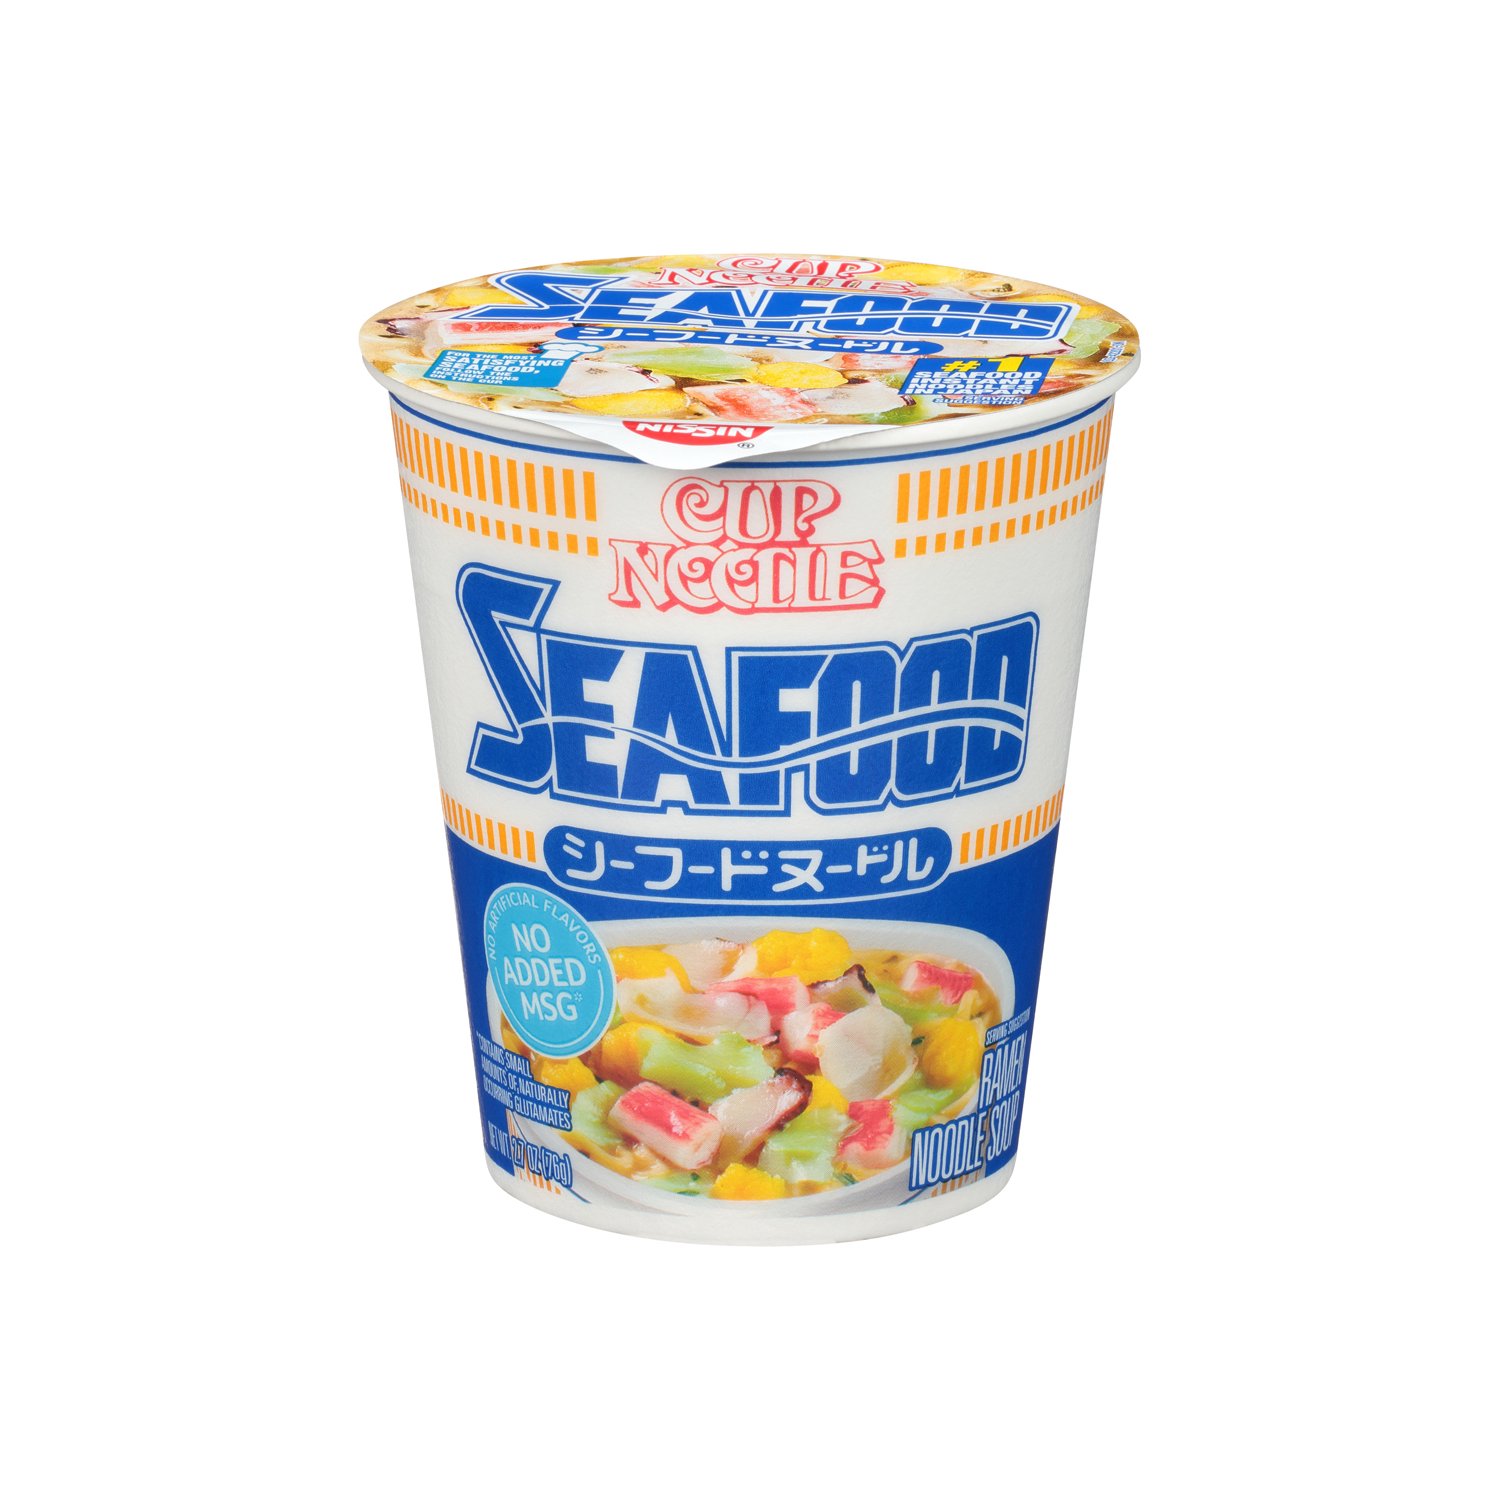 Nissin Instant Cup Noodles - Seafood